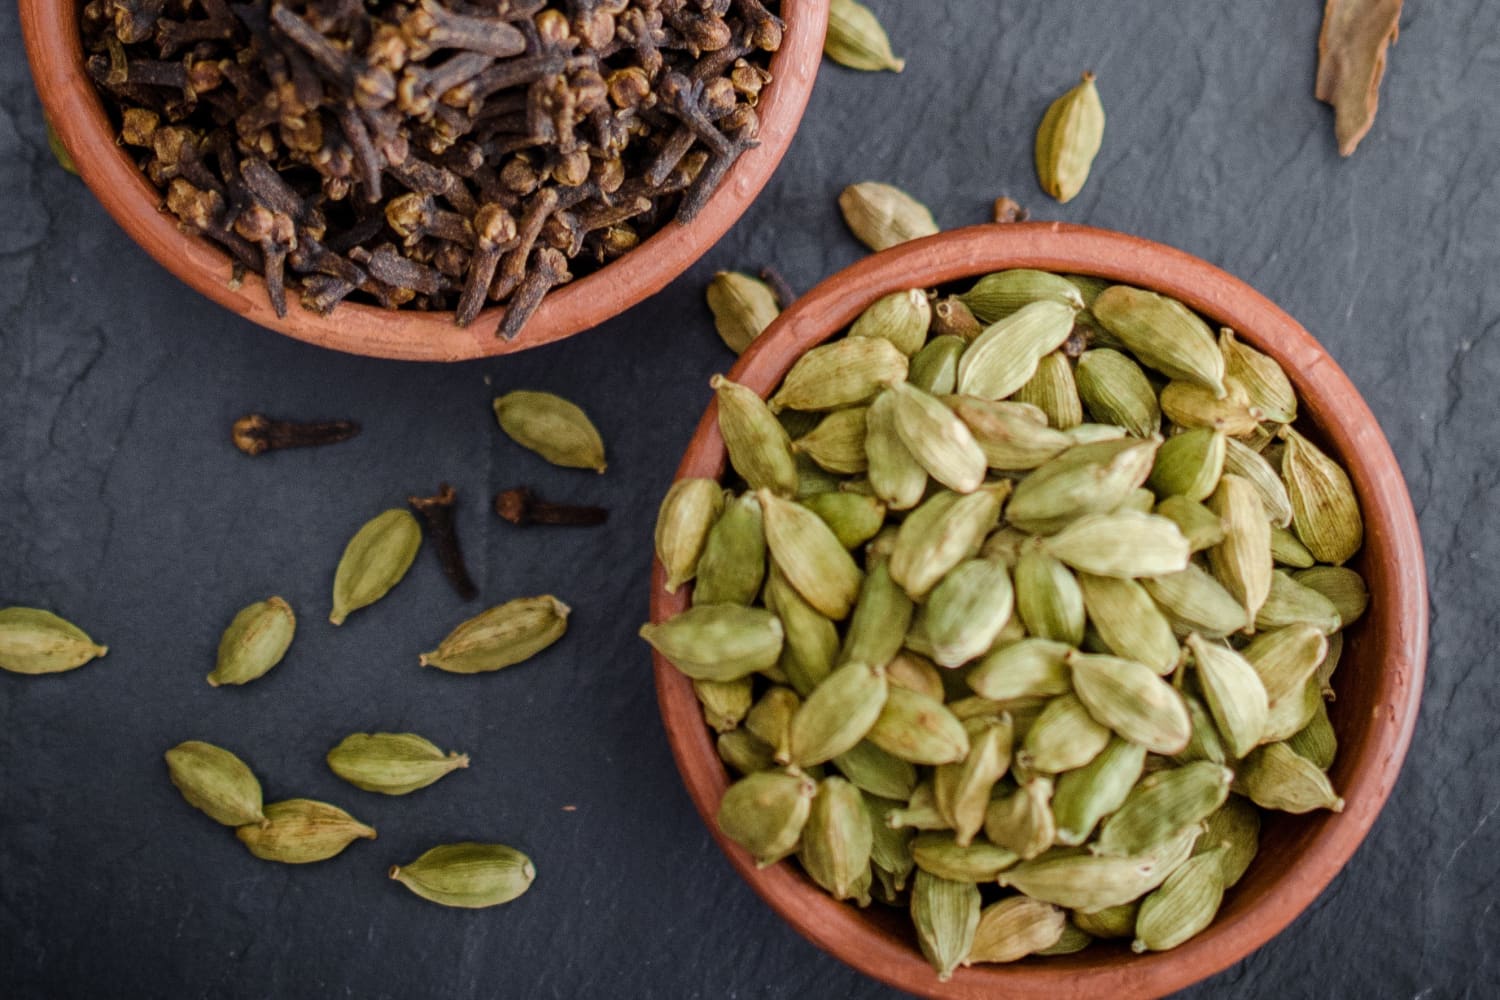 11 Essential Spices Every Kitchen Should Have